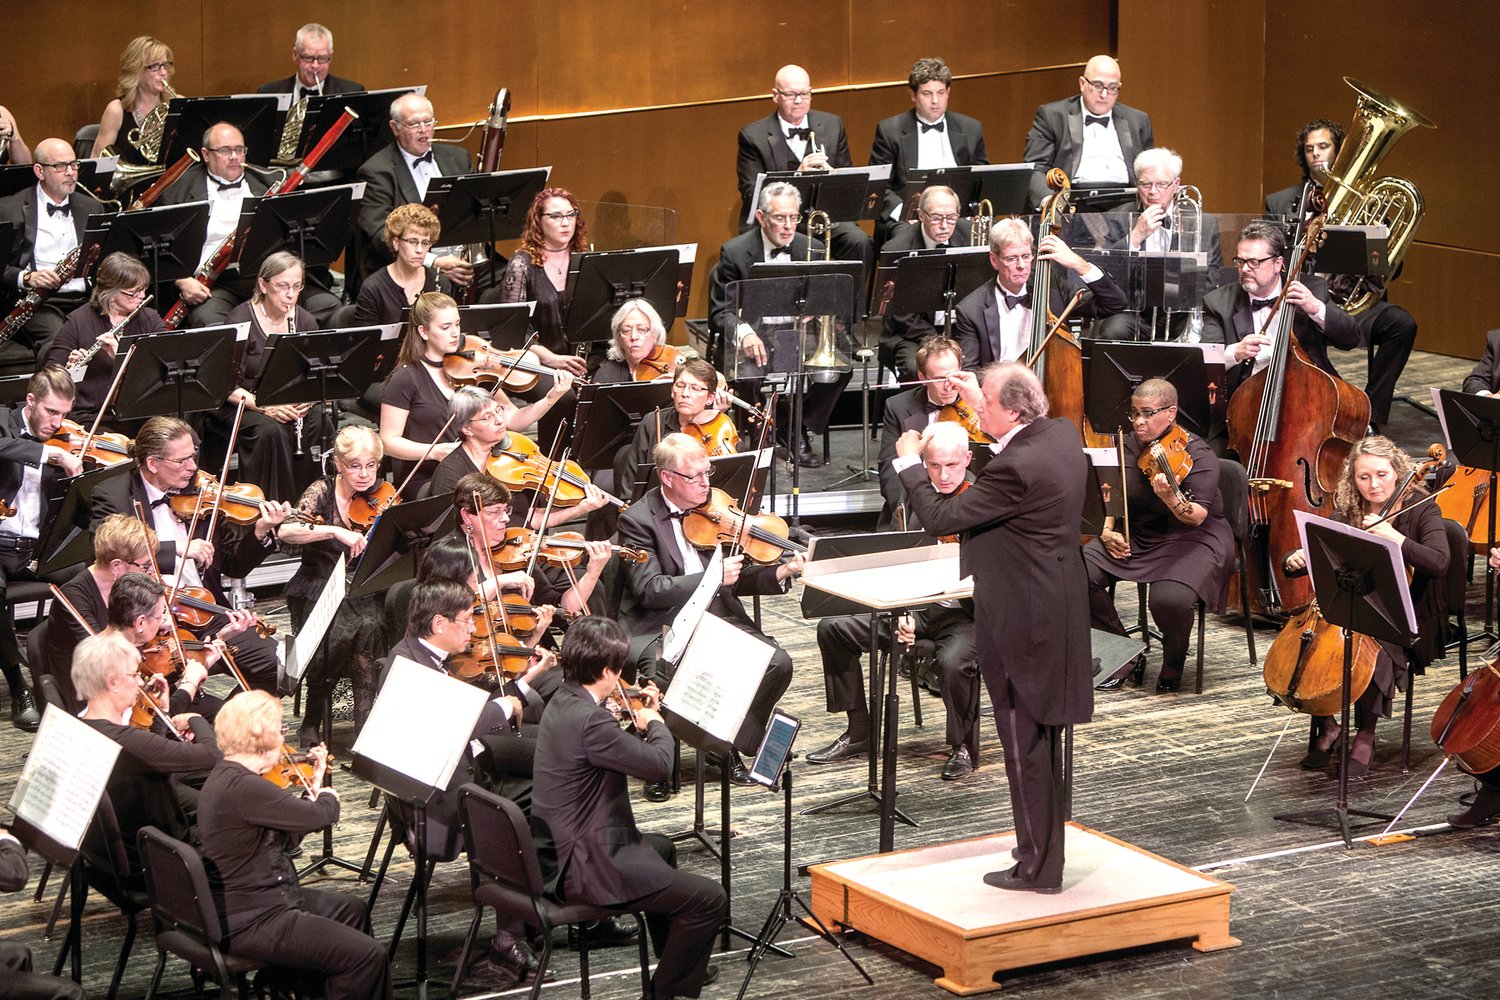 Capital Philharmonic performs in Trenton on New Year’s Eve. Photograph by William M. Brown.